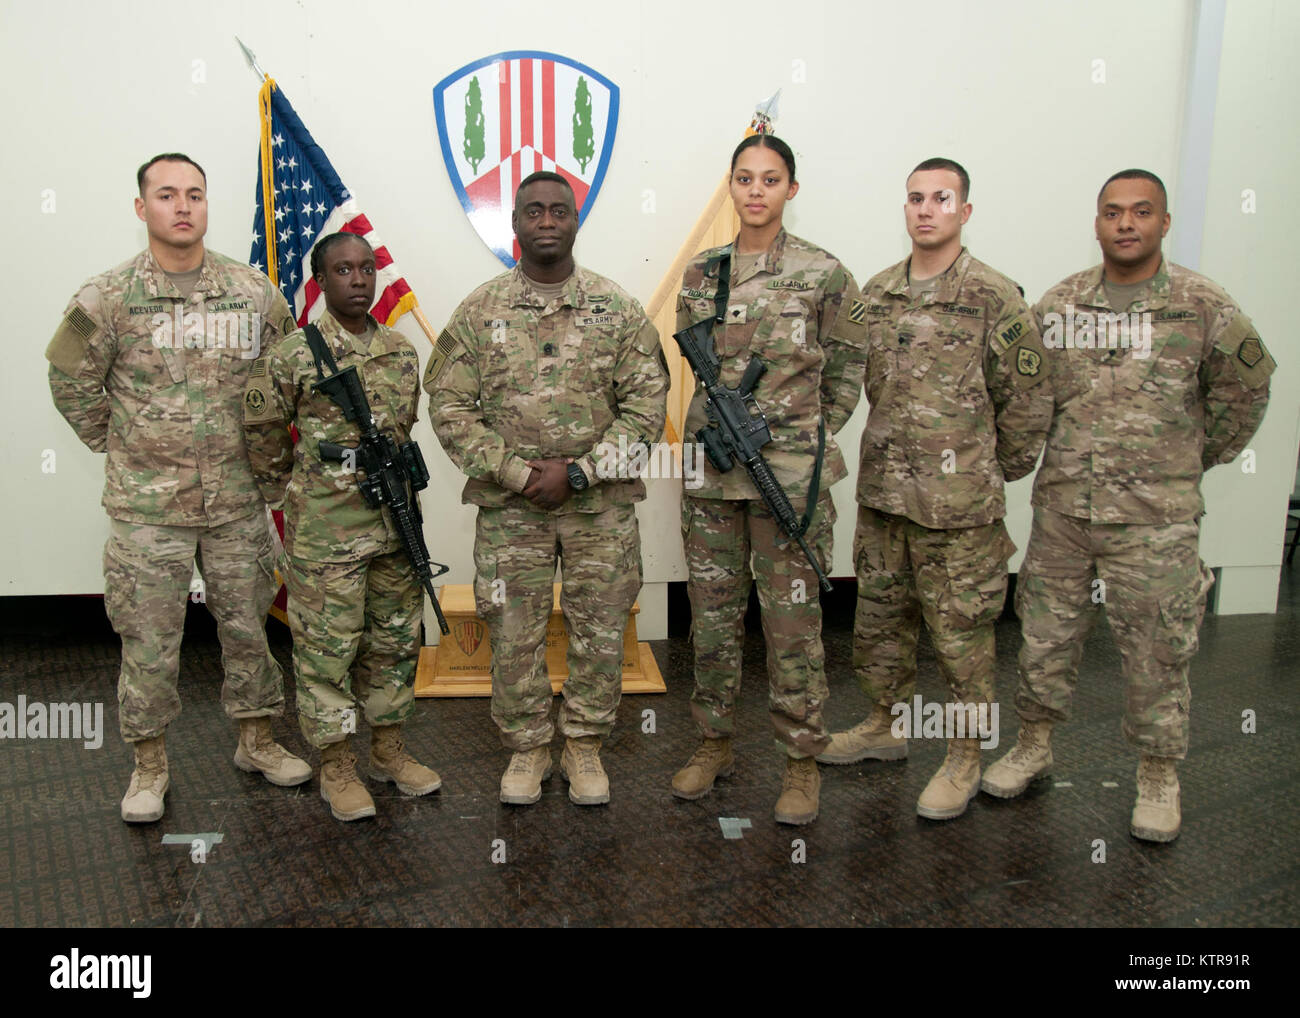 U.S. Army National Guard personnel daily duties and life. Working, training, helping, assisting, people, event, teaching and learning.  Soldier, sailor, airman, military, serviceman, service, duty. Stock Photo